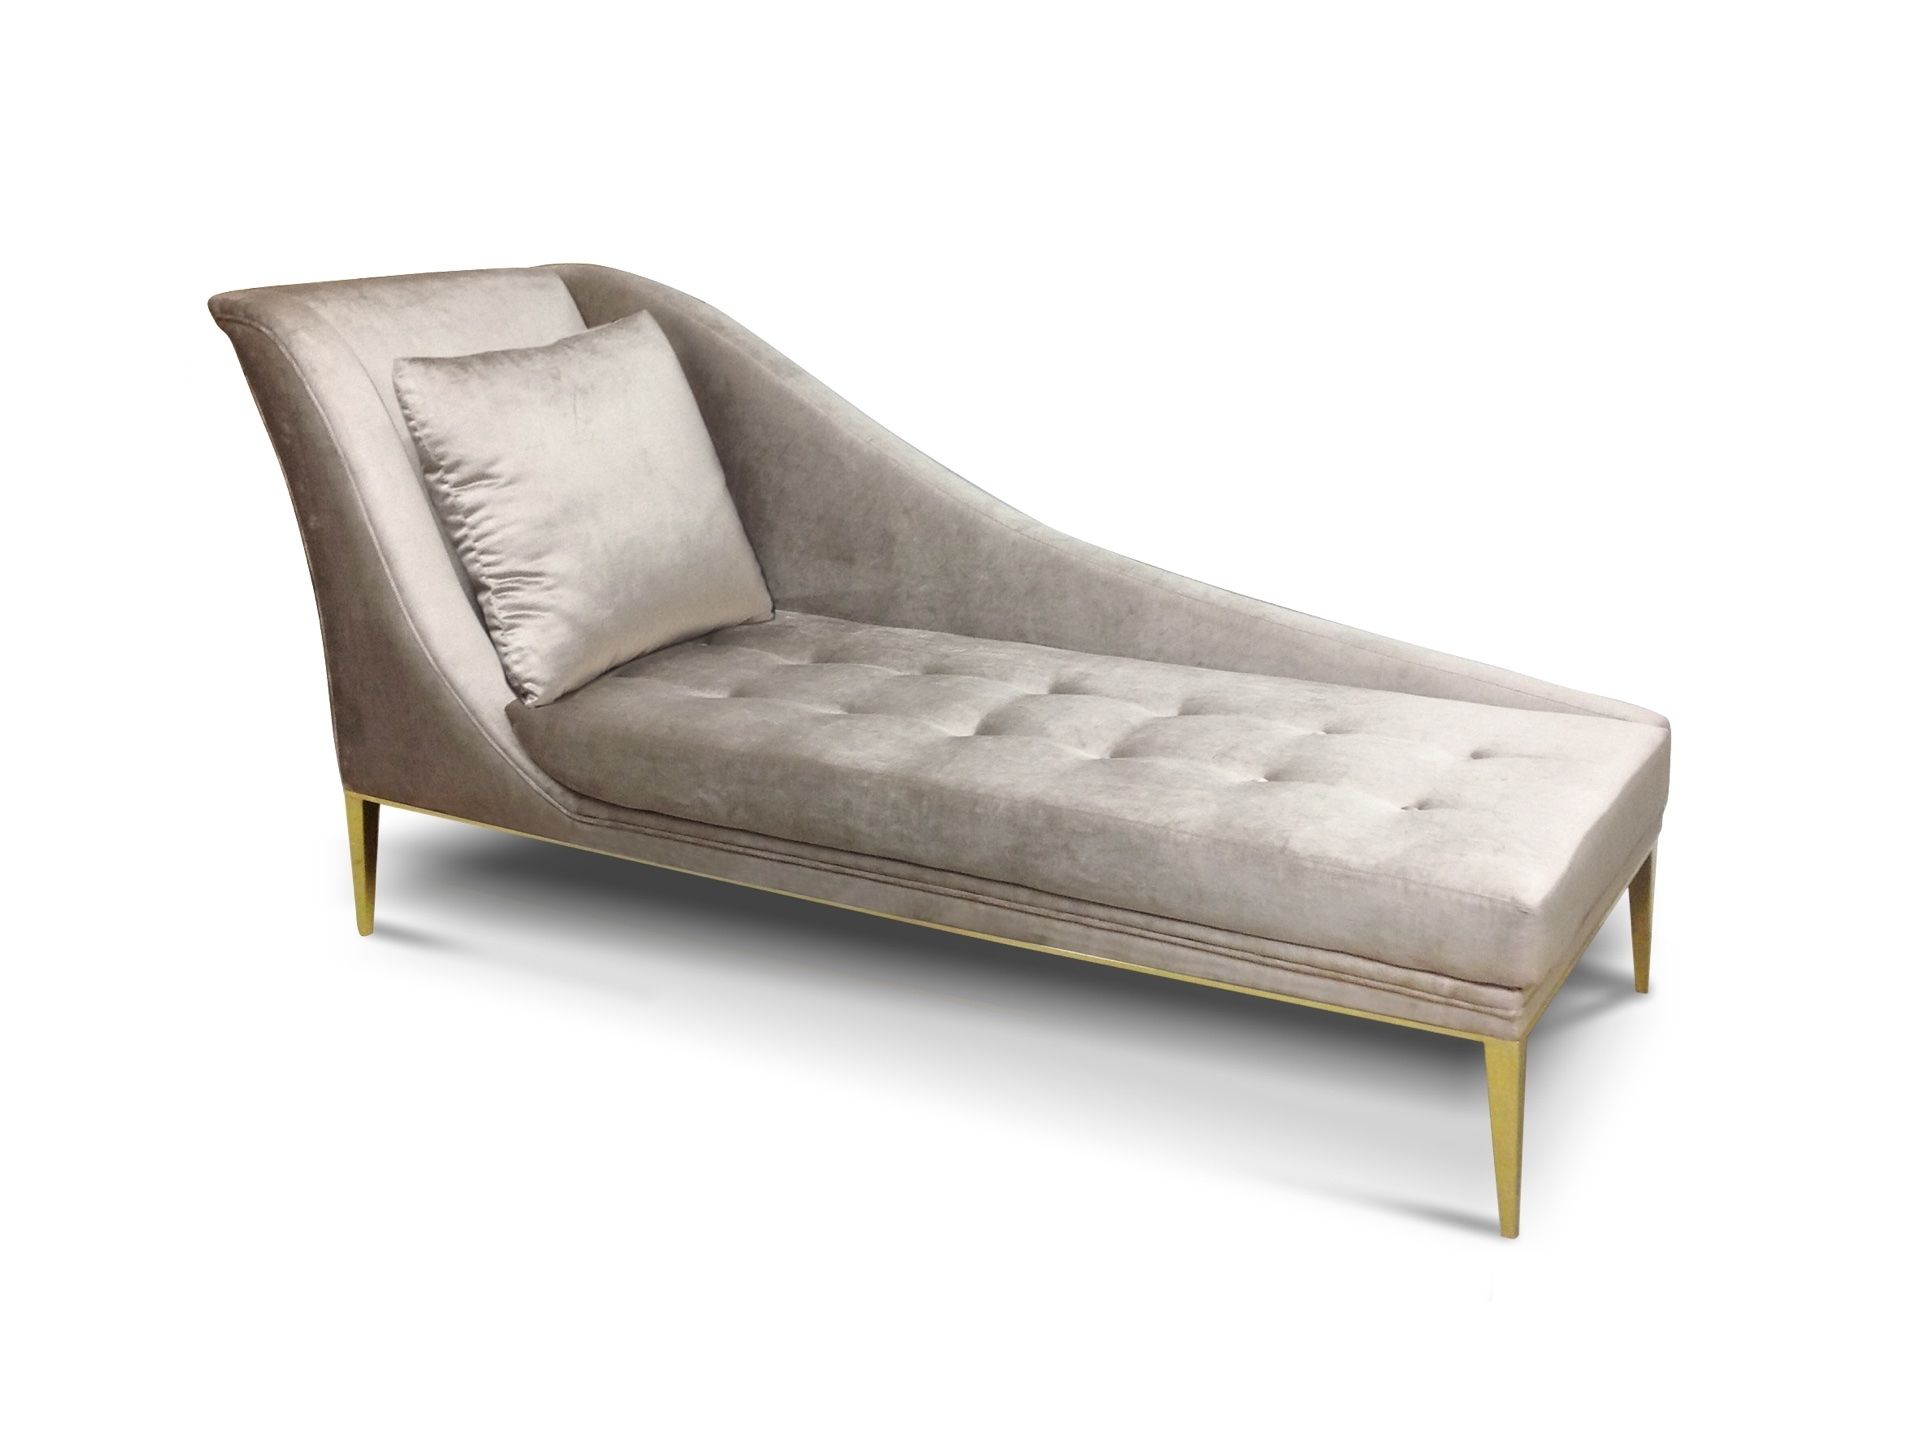 Trendy Chaise Benchs Within The Best Benches And Chaises For Your Home Decor (View 9 of 15)